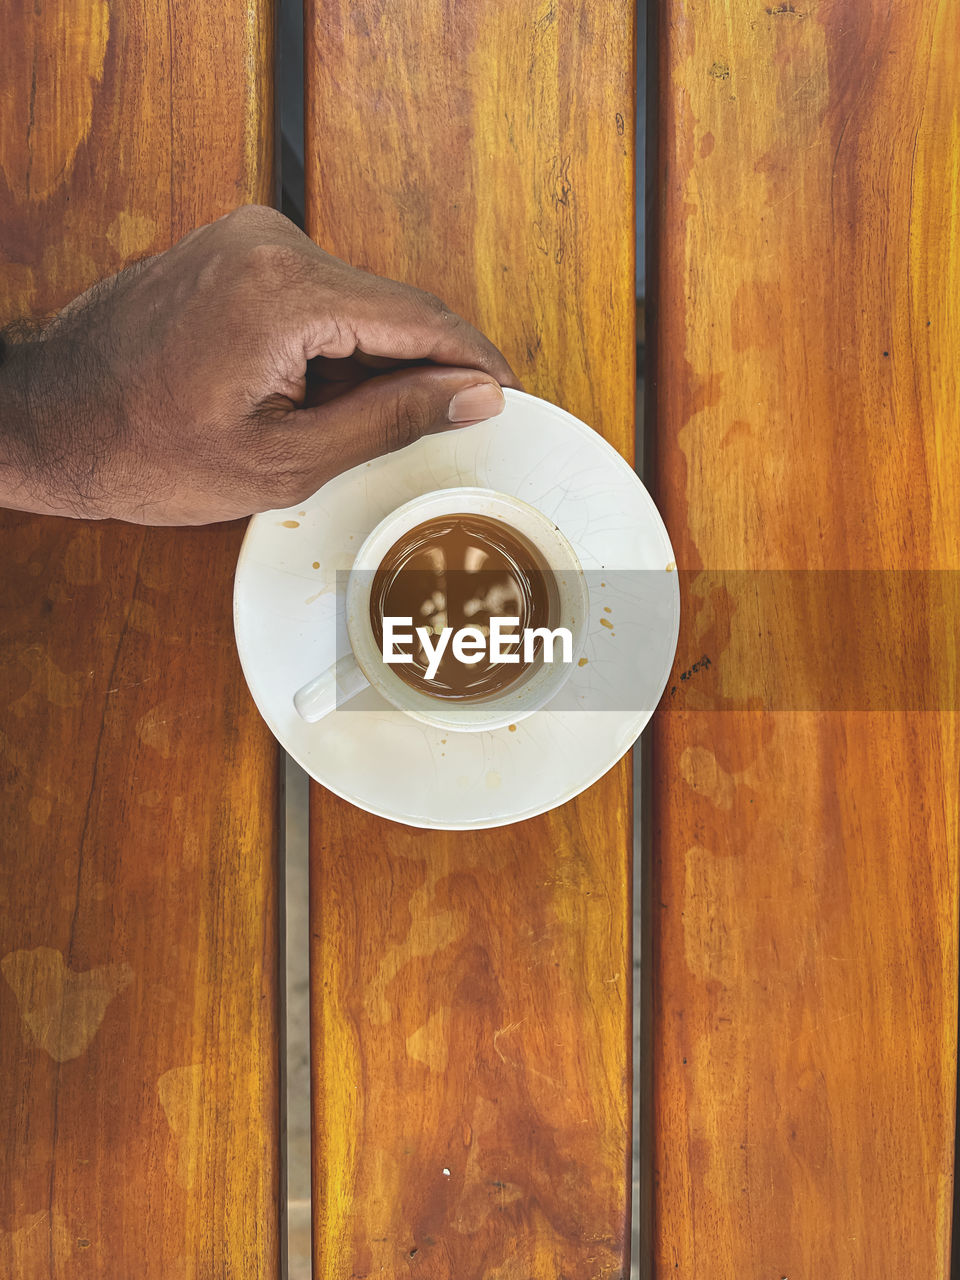 wood, food and drink, drink, hand, table, coffee, cup, refreshment, one person, coffee cup, mug, crockery, indoors, floor, food, adult, directly above, holding, brown, lifestyles, hardwood, wood stain, wood flooring, hot drink, saucer, close-up